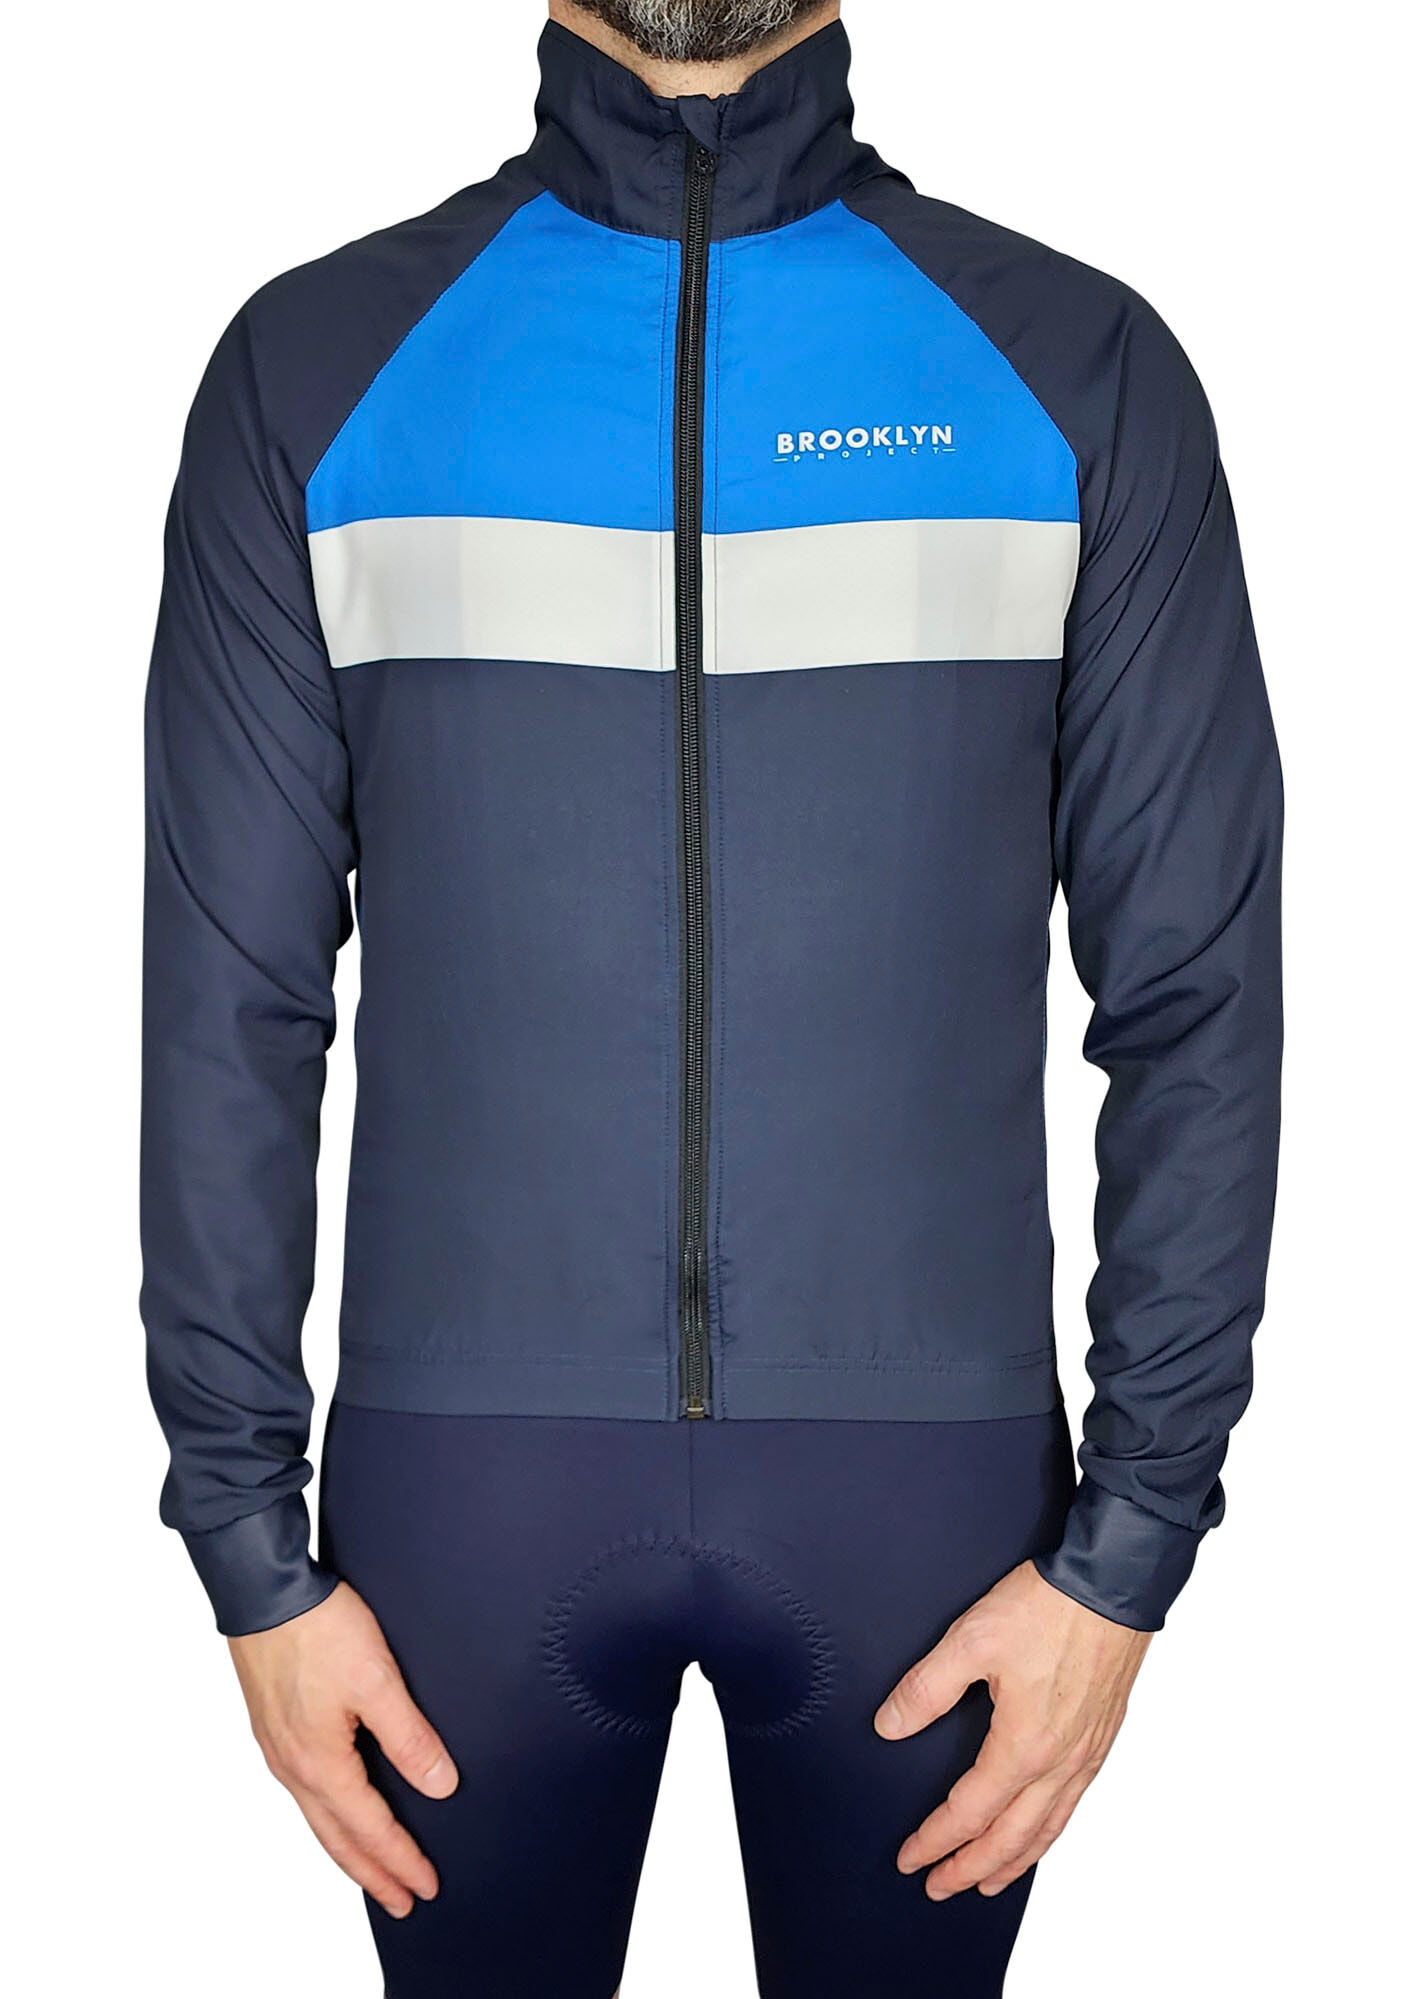 BKN Mens Navy and Blue Jacket Front